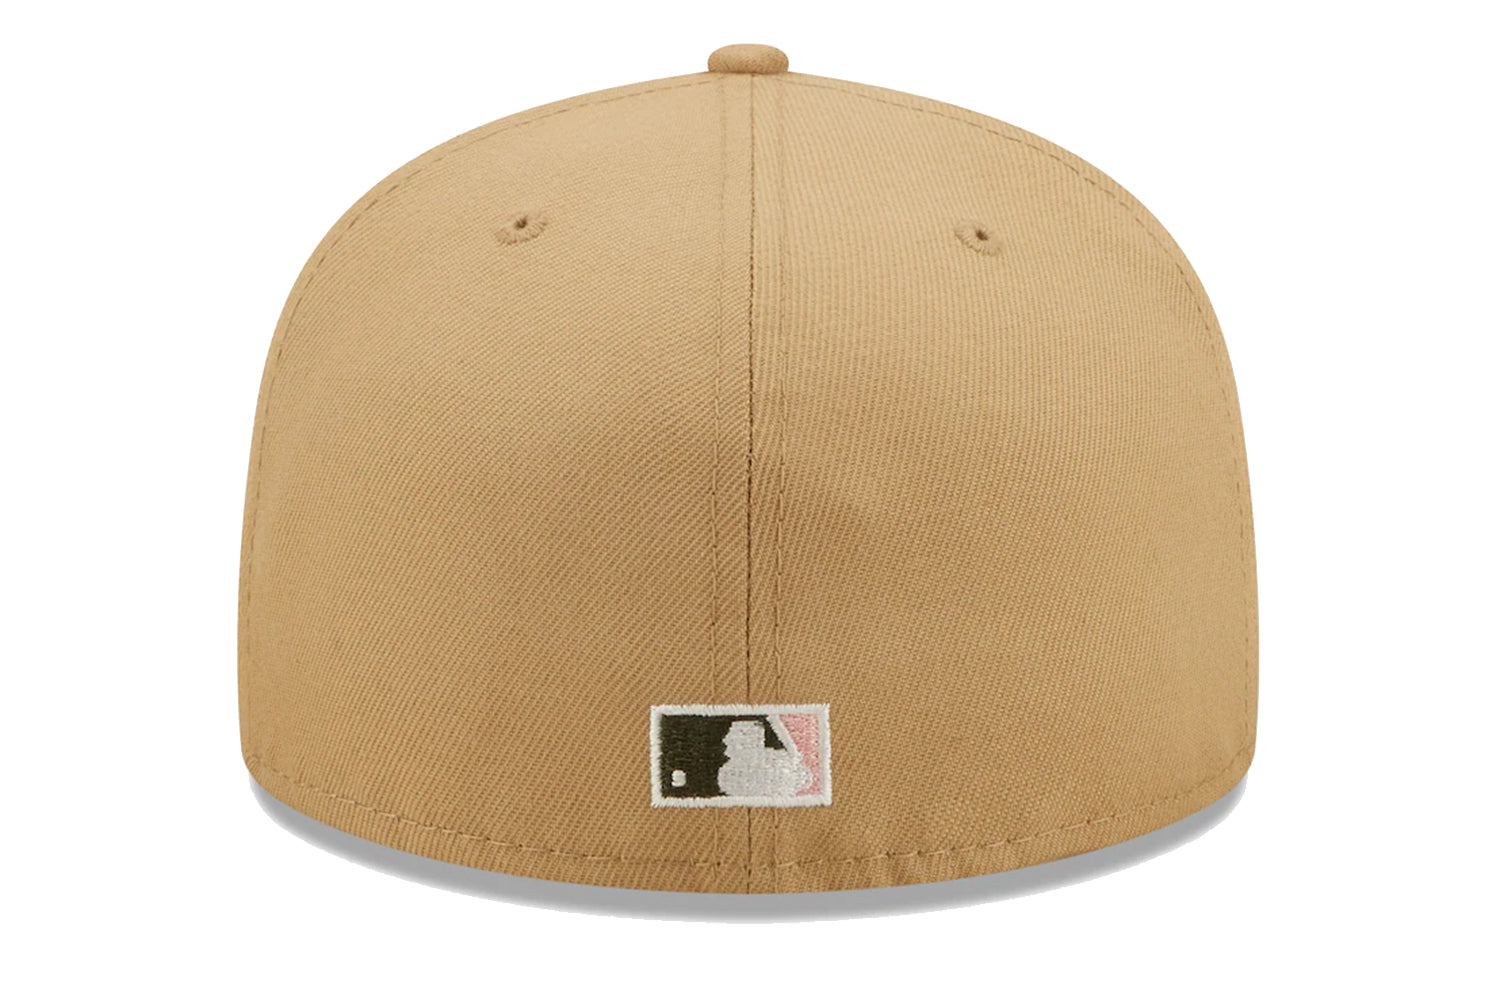 NEW ERA MLB LOS ANGELES DODGERS CAMEL PINK OLIVE 1992 ALL STAR GAME 59FIFTY EQUIPADO